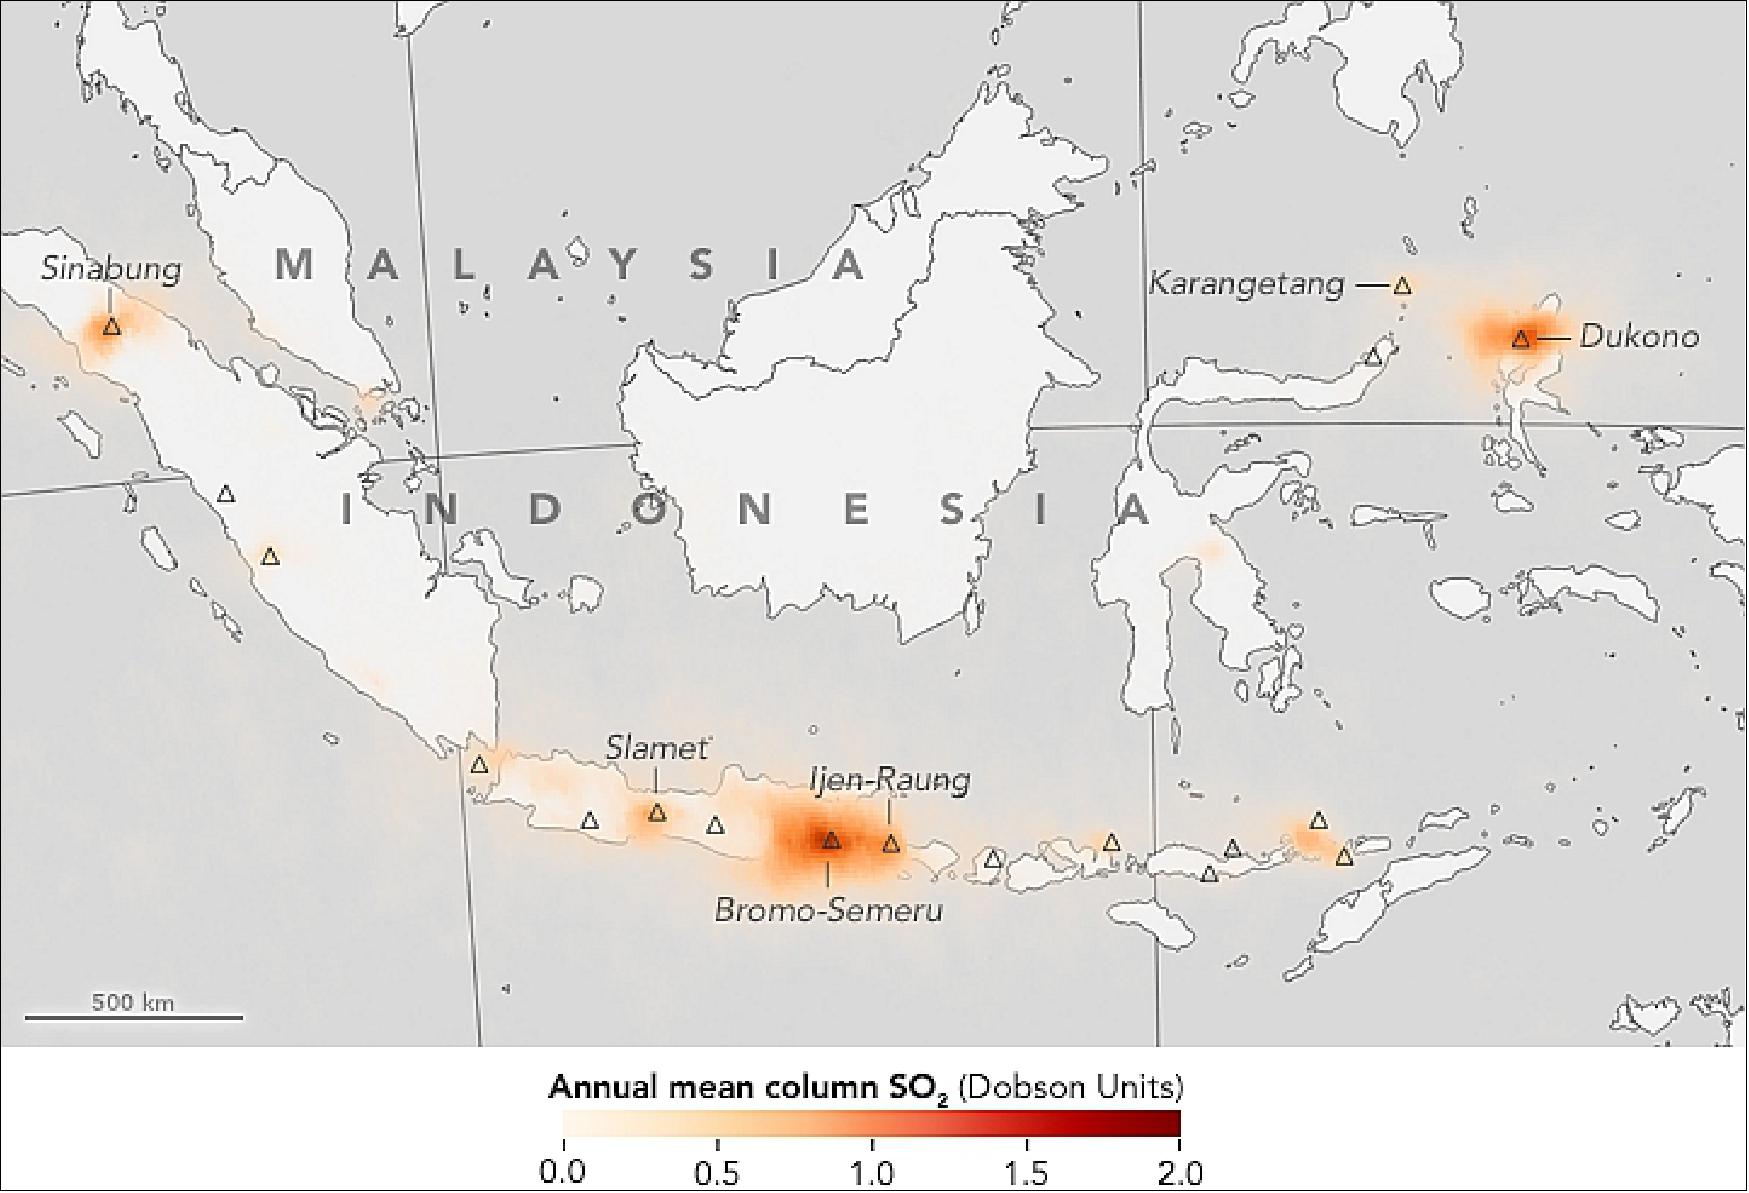 Figure 42: Mean SO2 columns acquired with OMI (Ozone Monitoring Instrument) on NASA's Aura satellite during the period 2014-2016 over the Indonesian Islands (image credit: NASA Earth Observatory, maps created by Jesse Allen using OMI data provided by Chris McLinden, caption by Allison Mills)